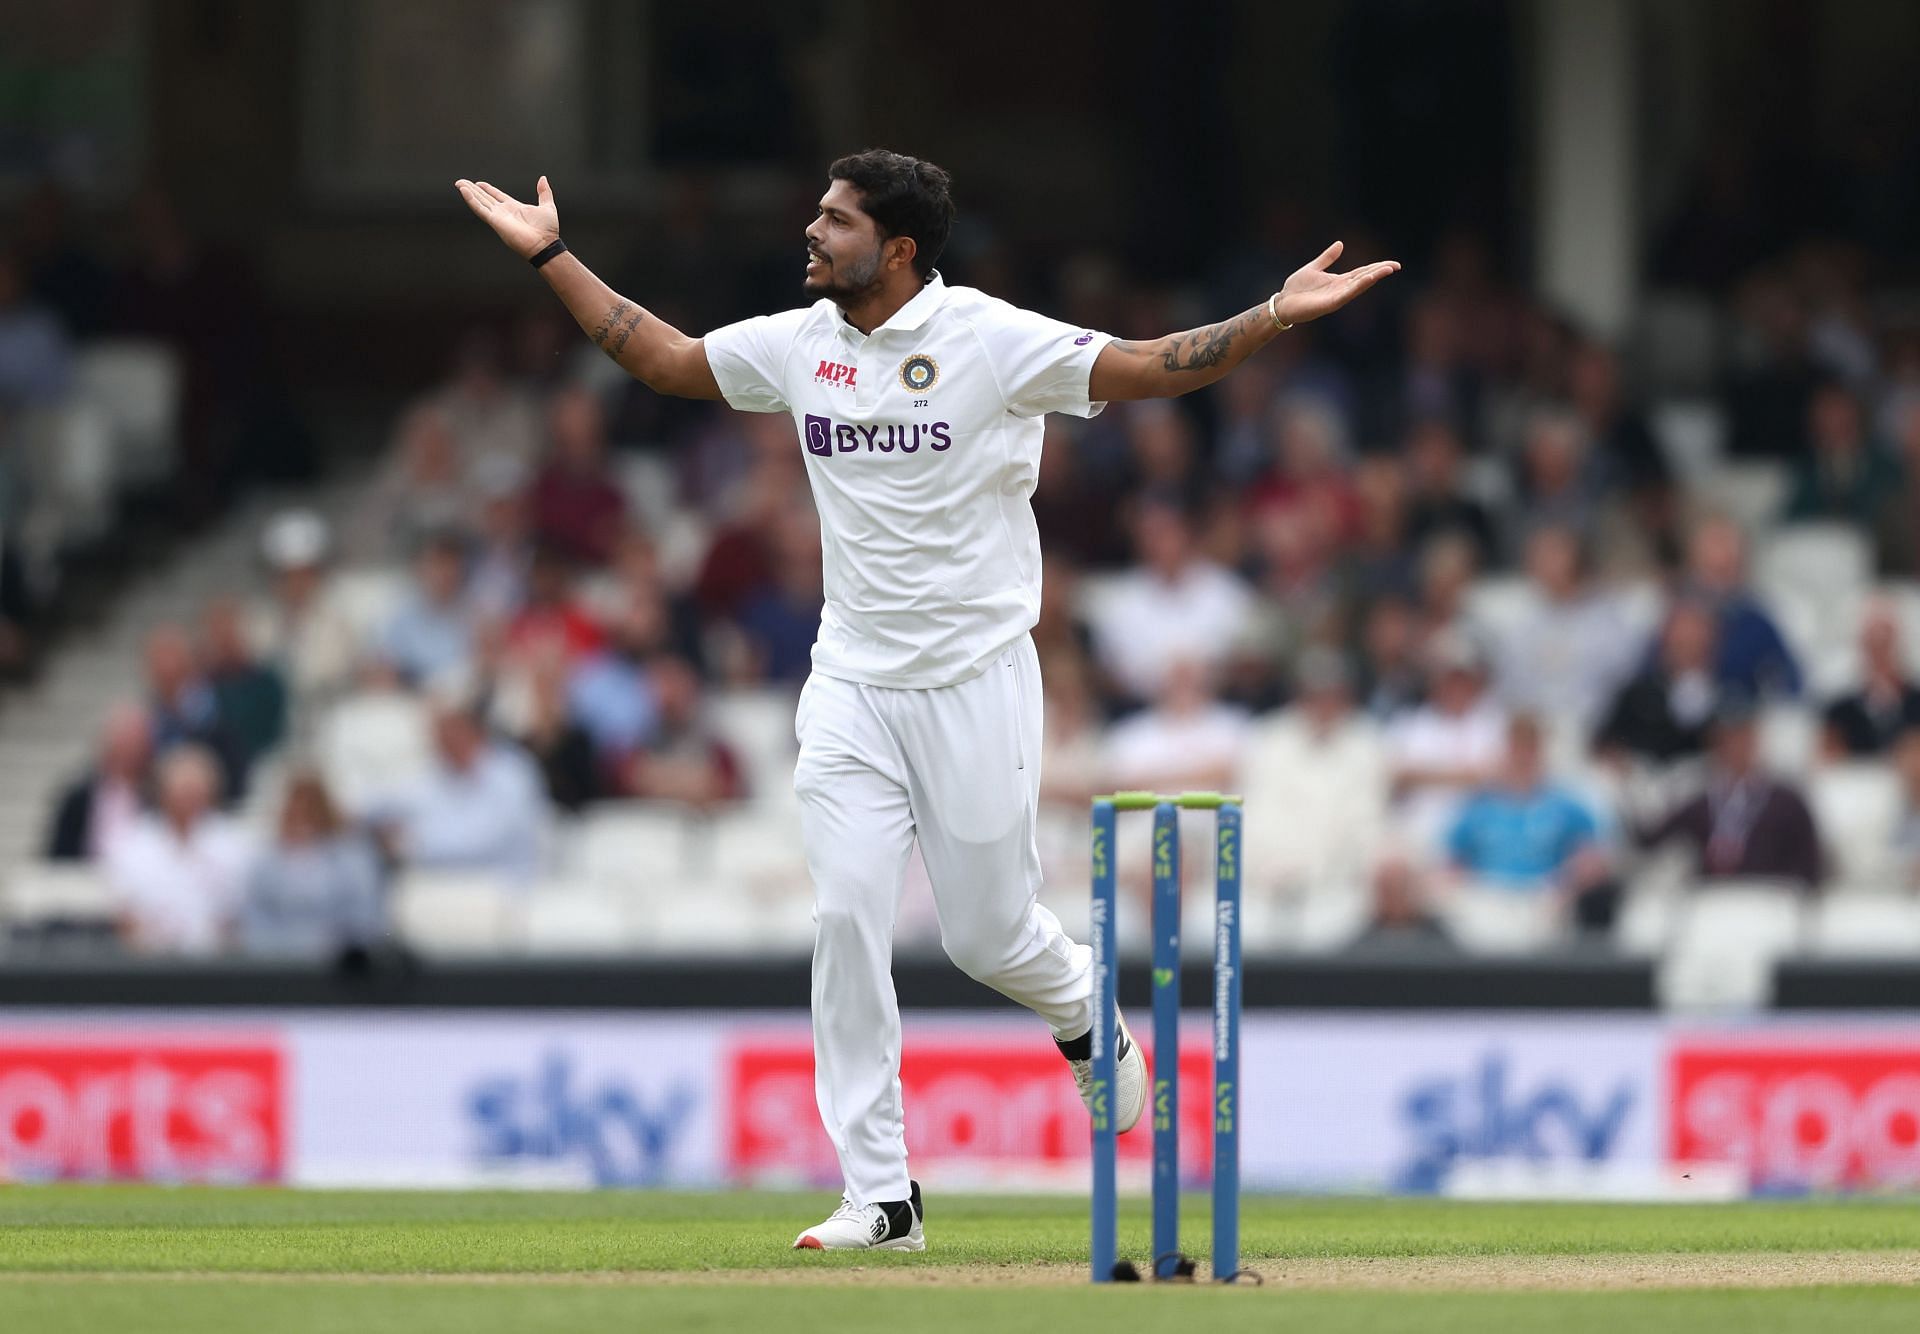 Did India miss a trick by not playing Umesh Yadav at Edgbaston?